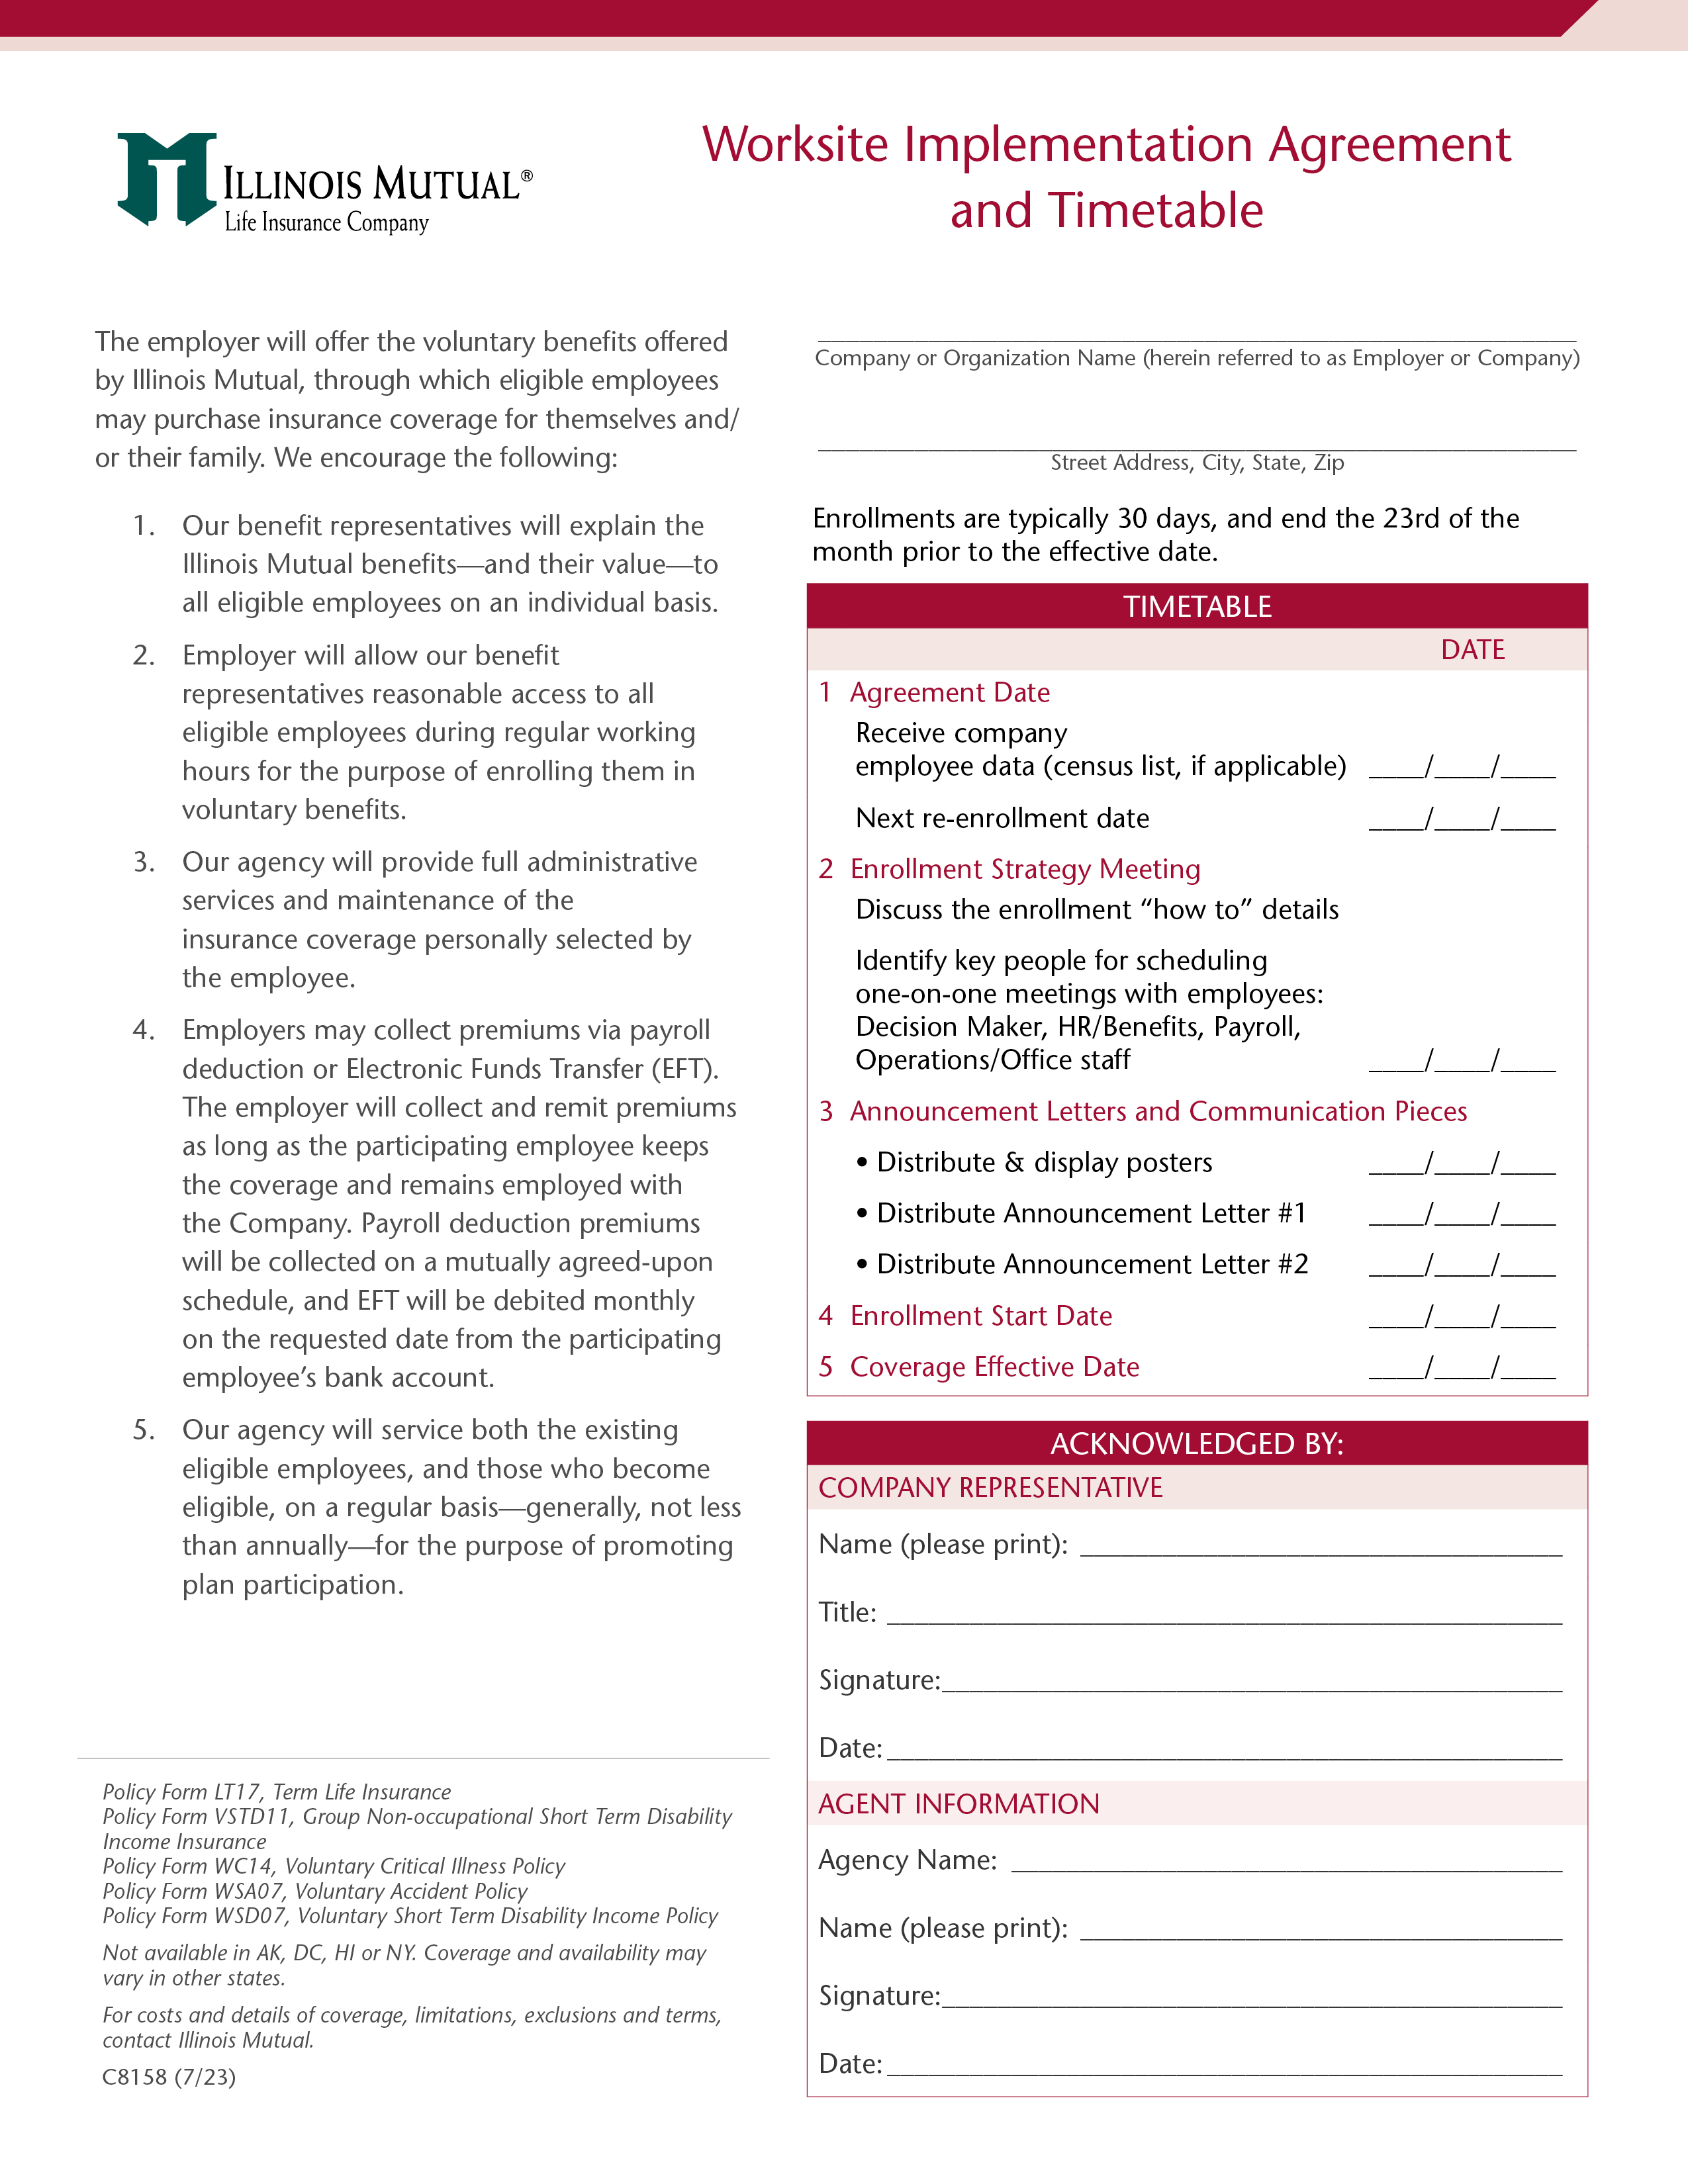 image of Employer Agreement & Timetable Fillable Flyer C8158